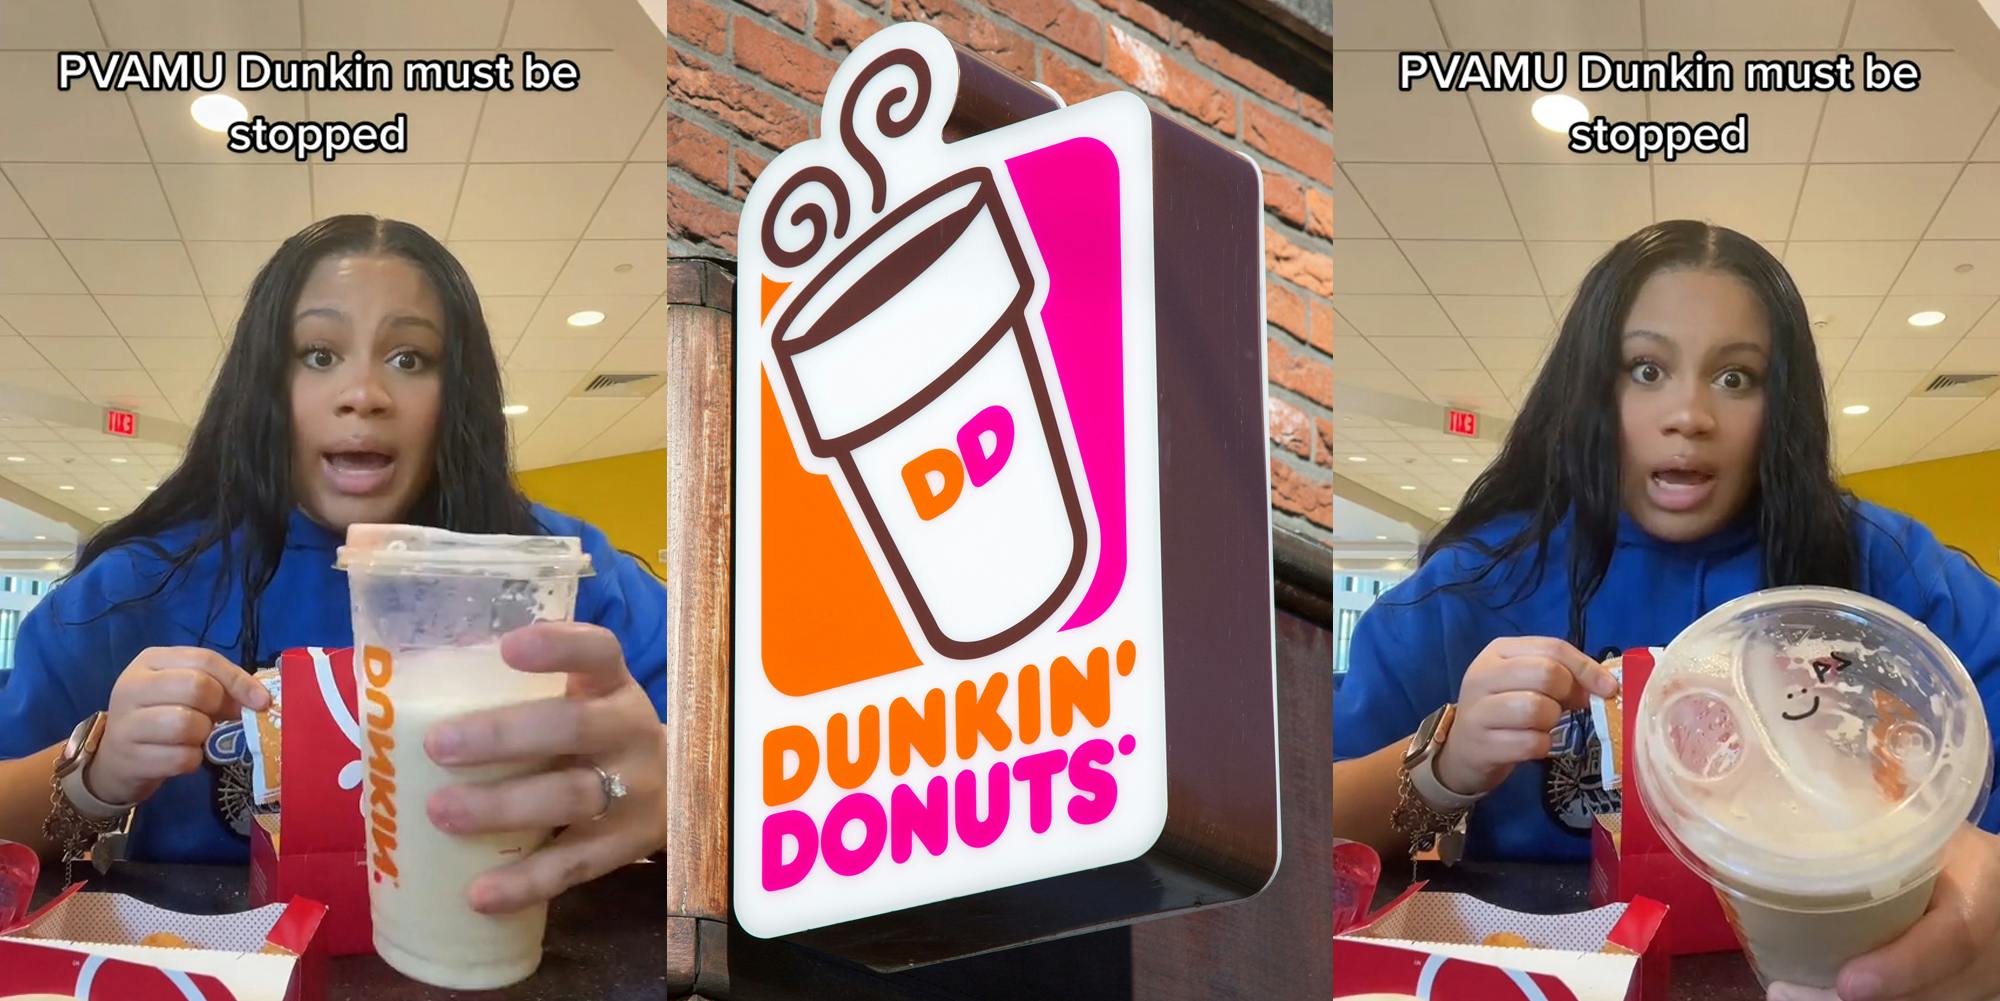 customer speaking holding Dunkin' drink with caption "PVAMU Dunkin must be stopped" (l) Dunkin' Donuts sign (c) customer speaking holding Dunkin' drink towards camera with sharpie ":) AS" with caption "PVAMU Dunkin must be stopped" (r)